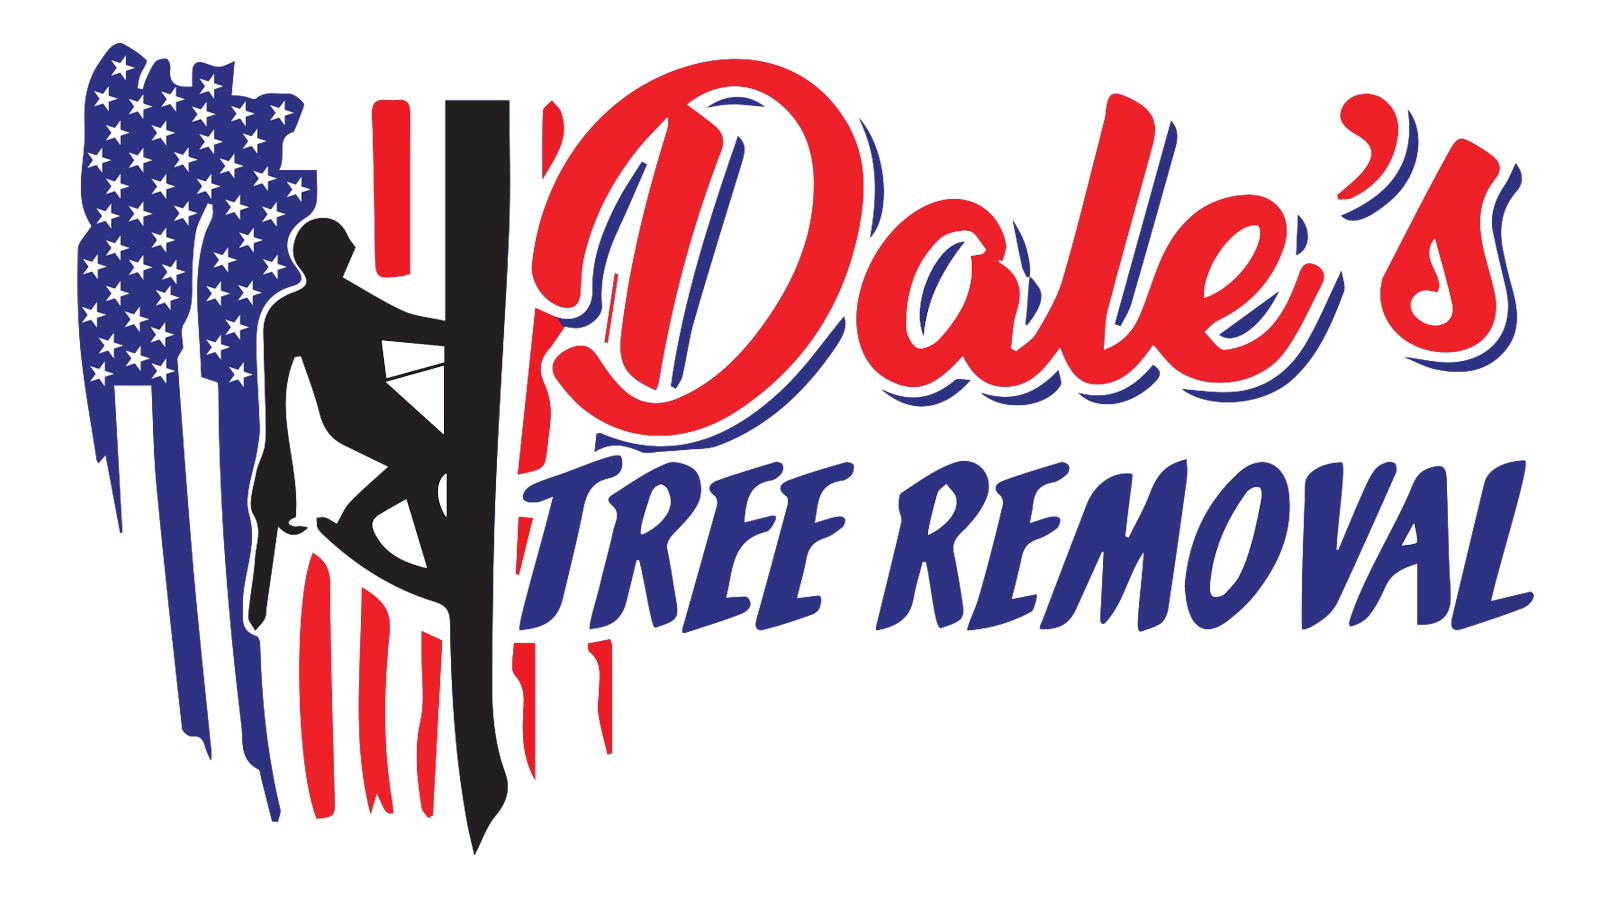 Dale's Tree Removal Service